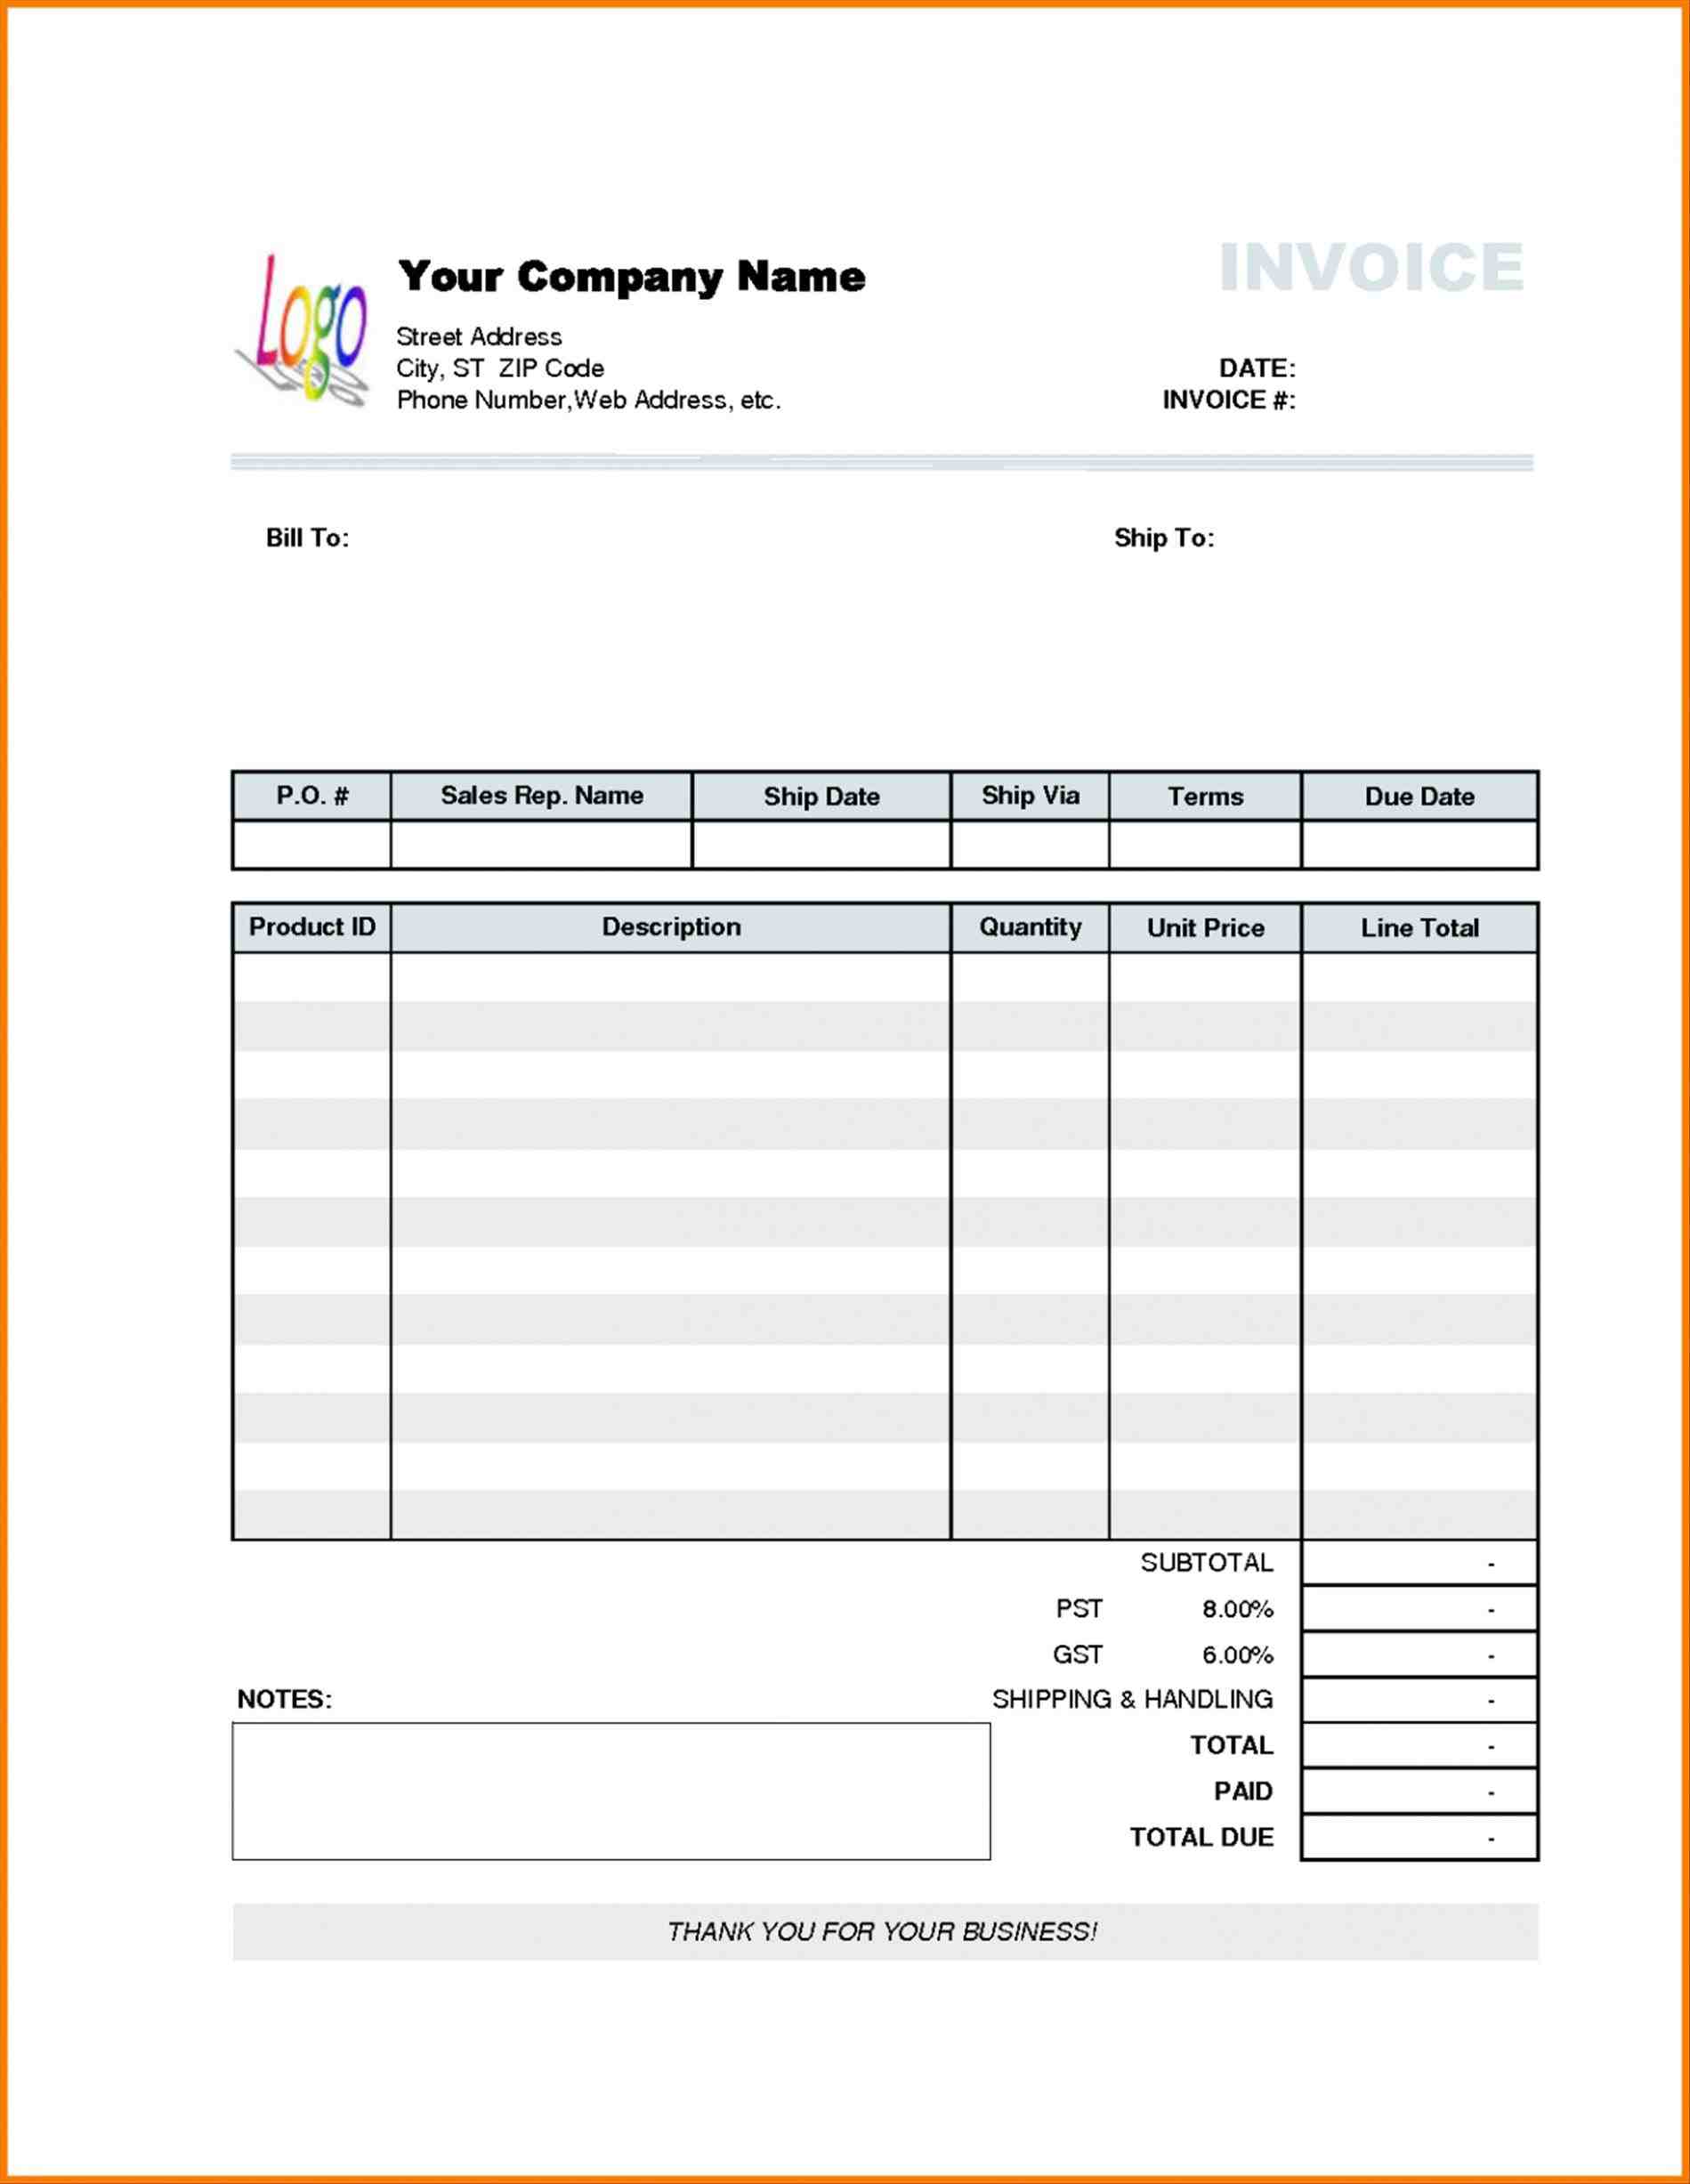 Maintenance Invoice invoice template free and hvac fresh property images fresh Maintenance Invoice property maintenance invoice template images free ideas